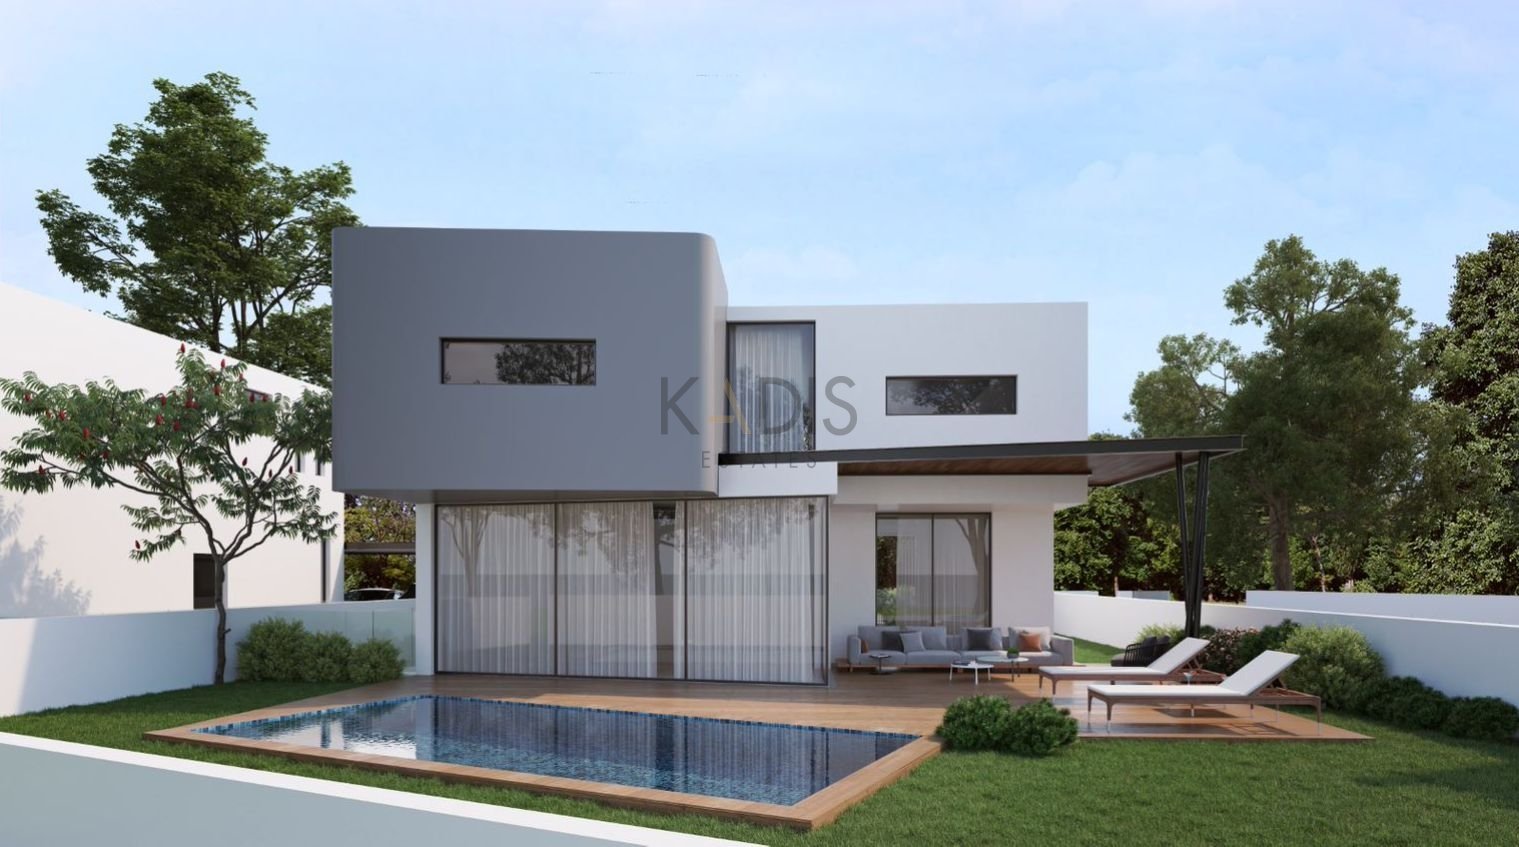 4 Bedroom House for Sale in Strovolos, Nicosia District